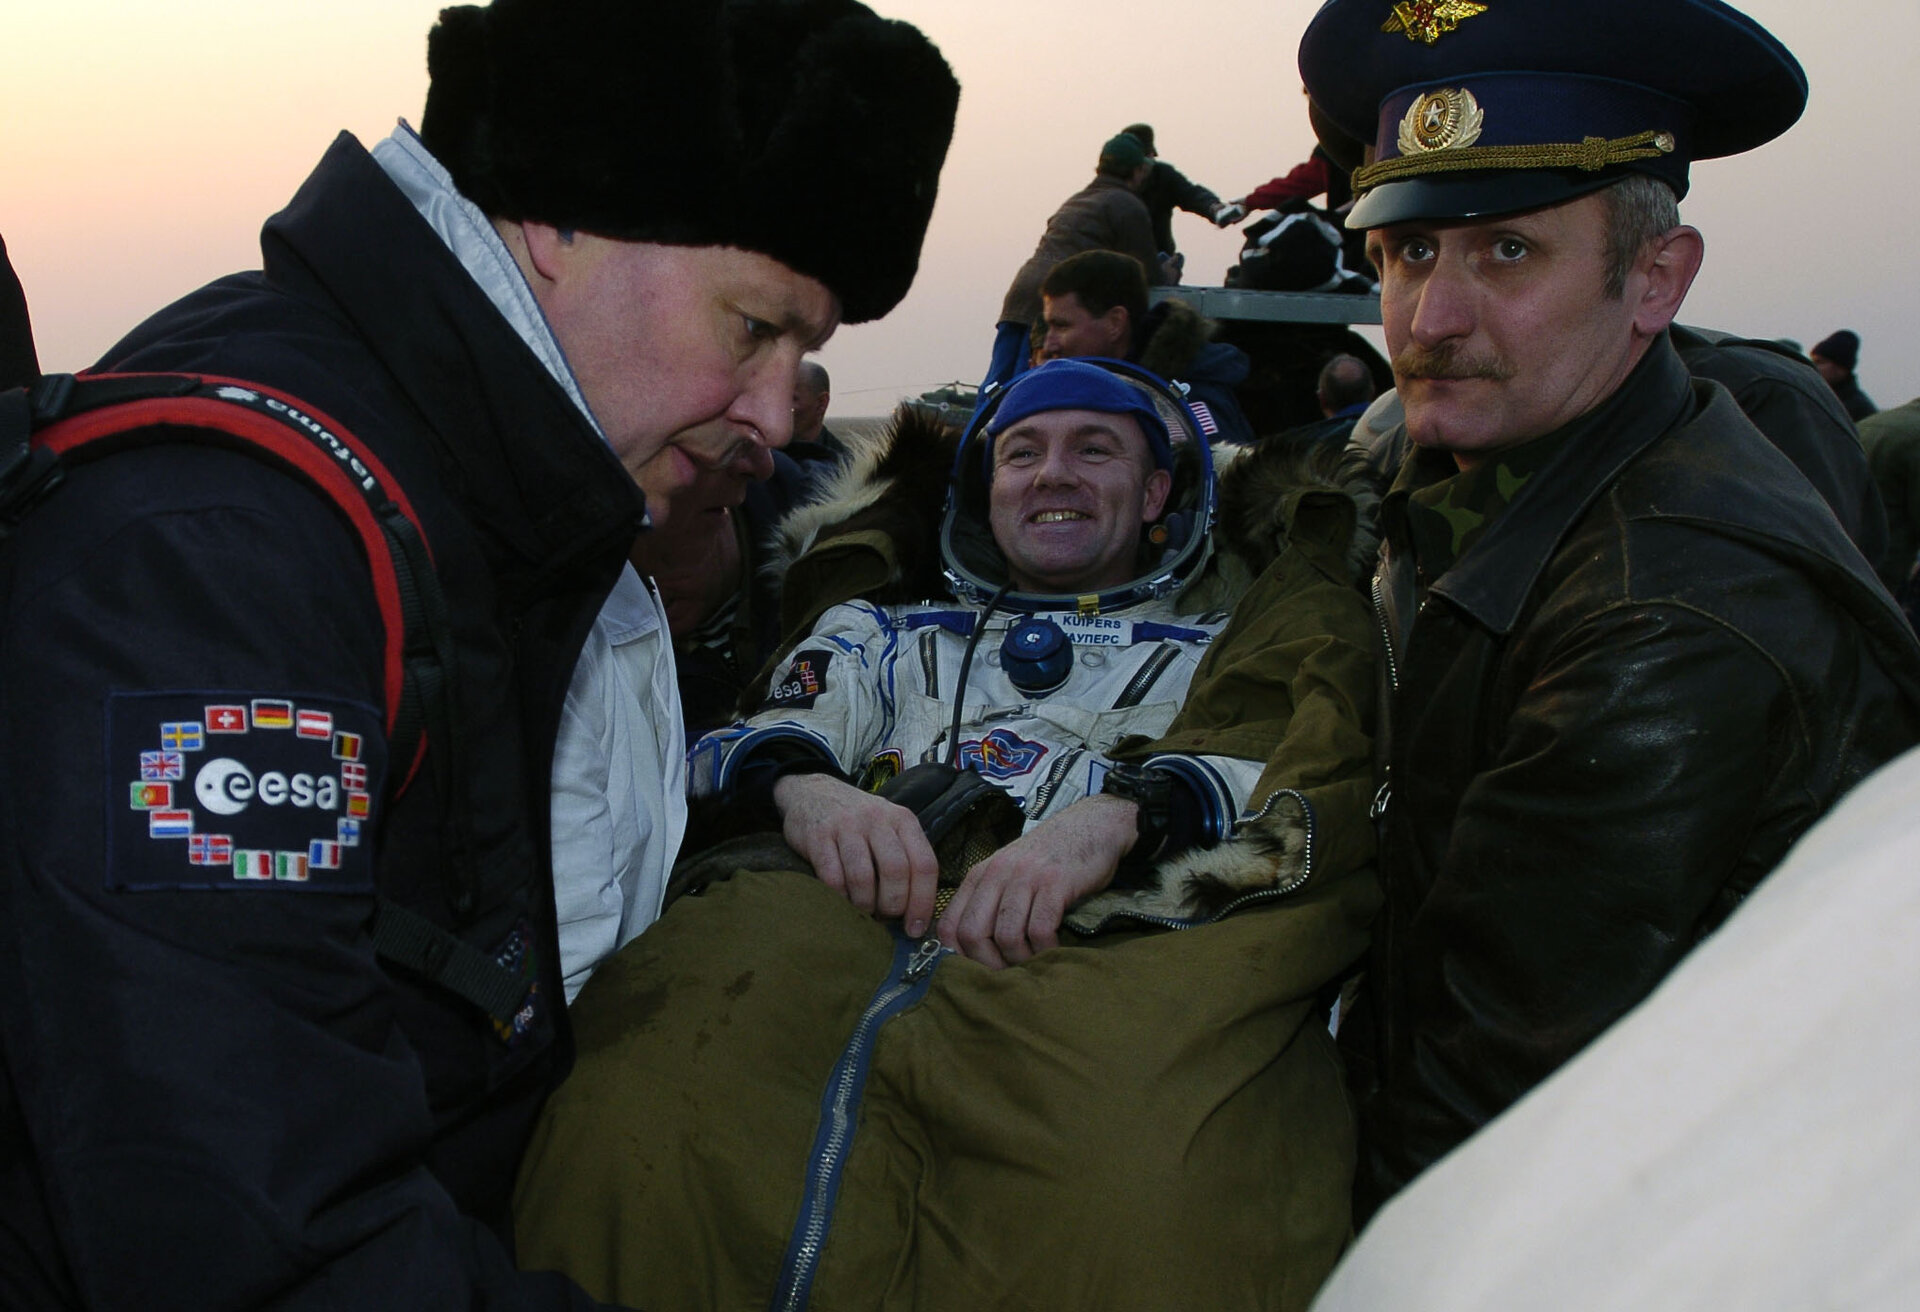 Andre Kuipers safely back on Earth